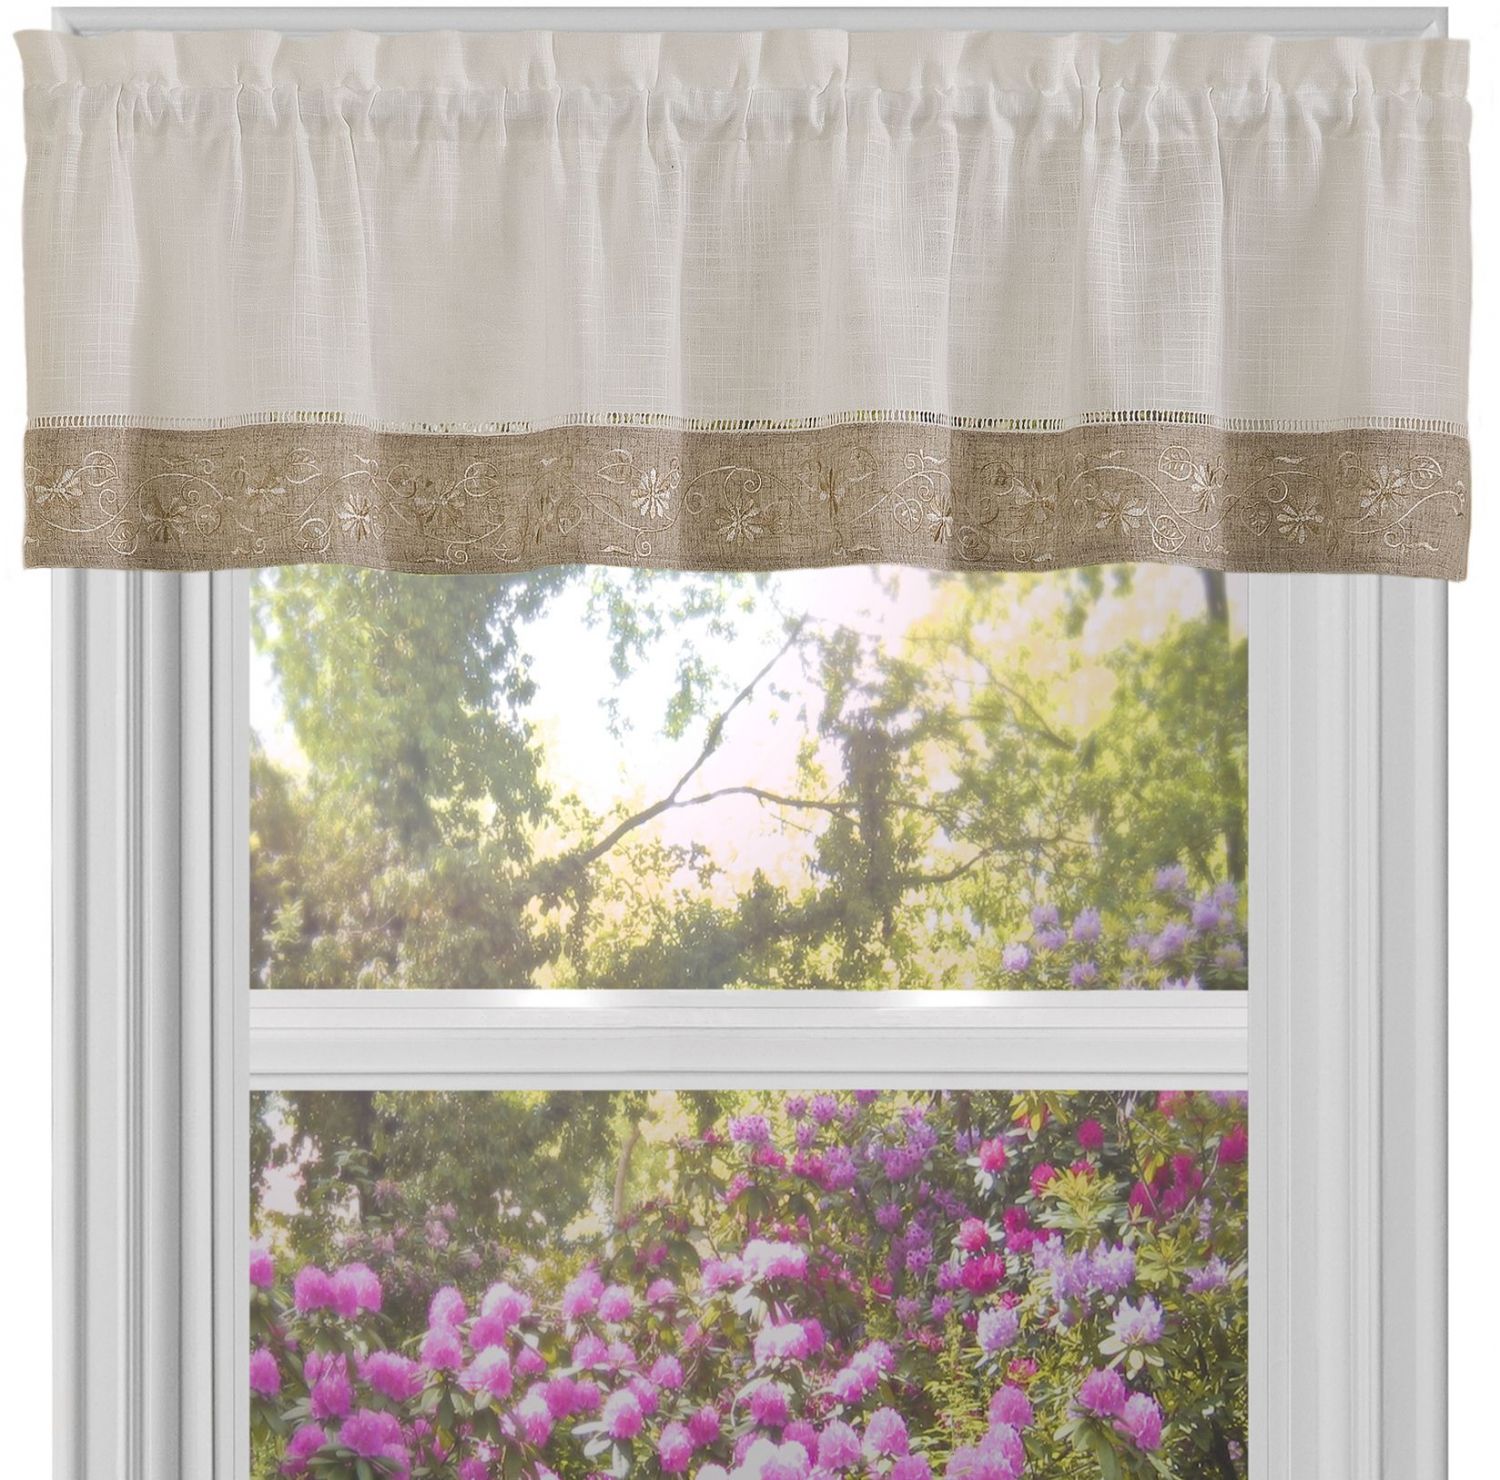 Details About Achim Oakwood Valance Natural W/ Monochromatic Floral  Embroidery Tailored Linen In Top Of The Morning Printed Tailored Cottage Curtain Tier Sets (View 13 of 20)